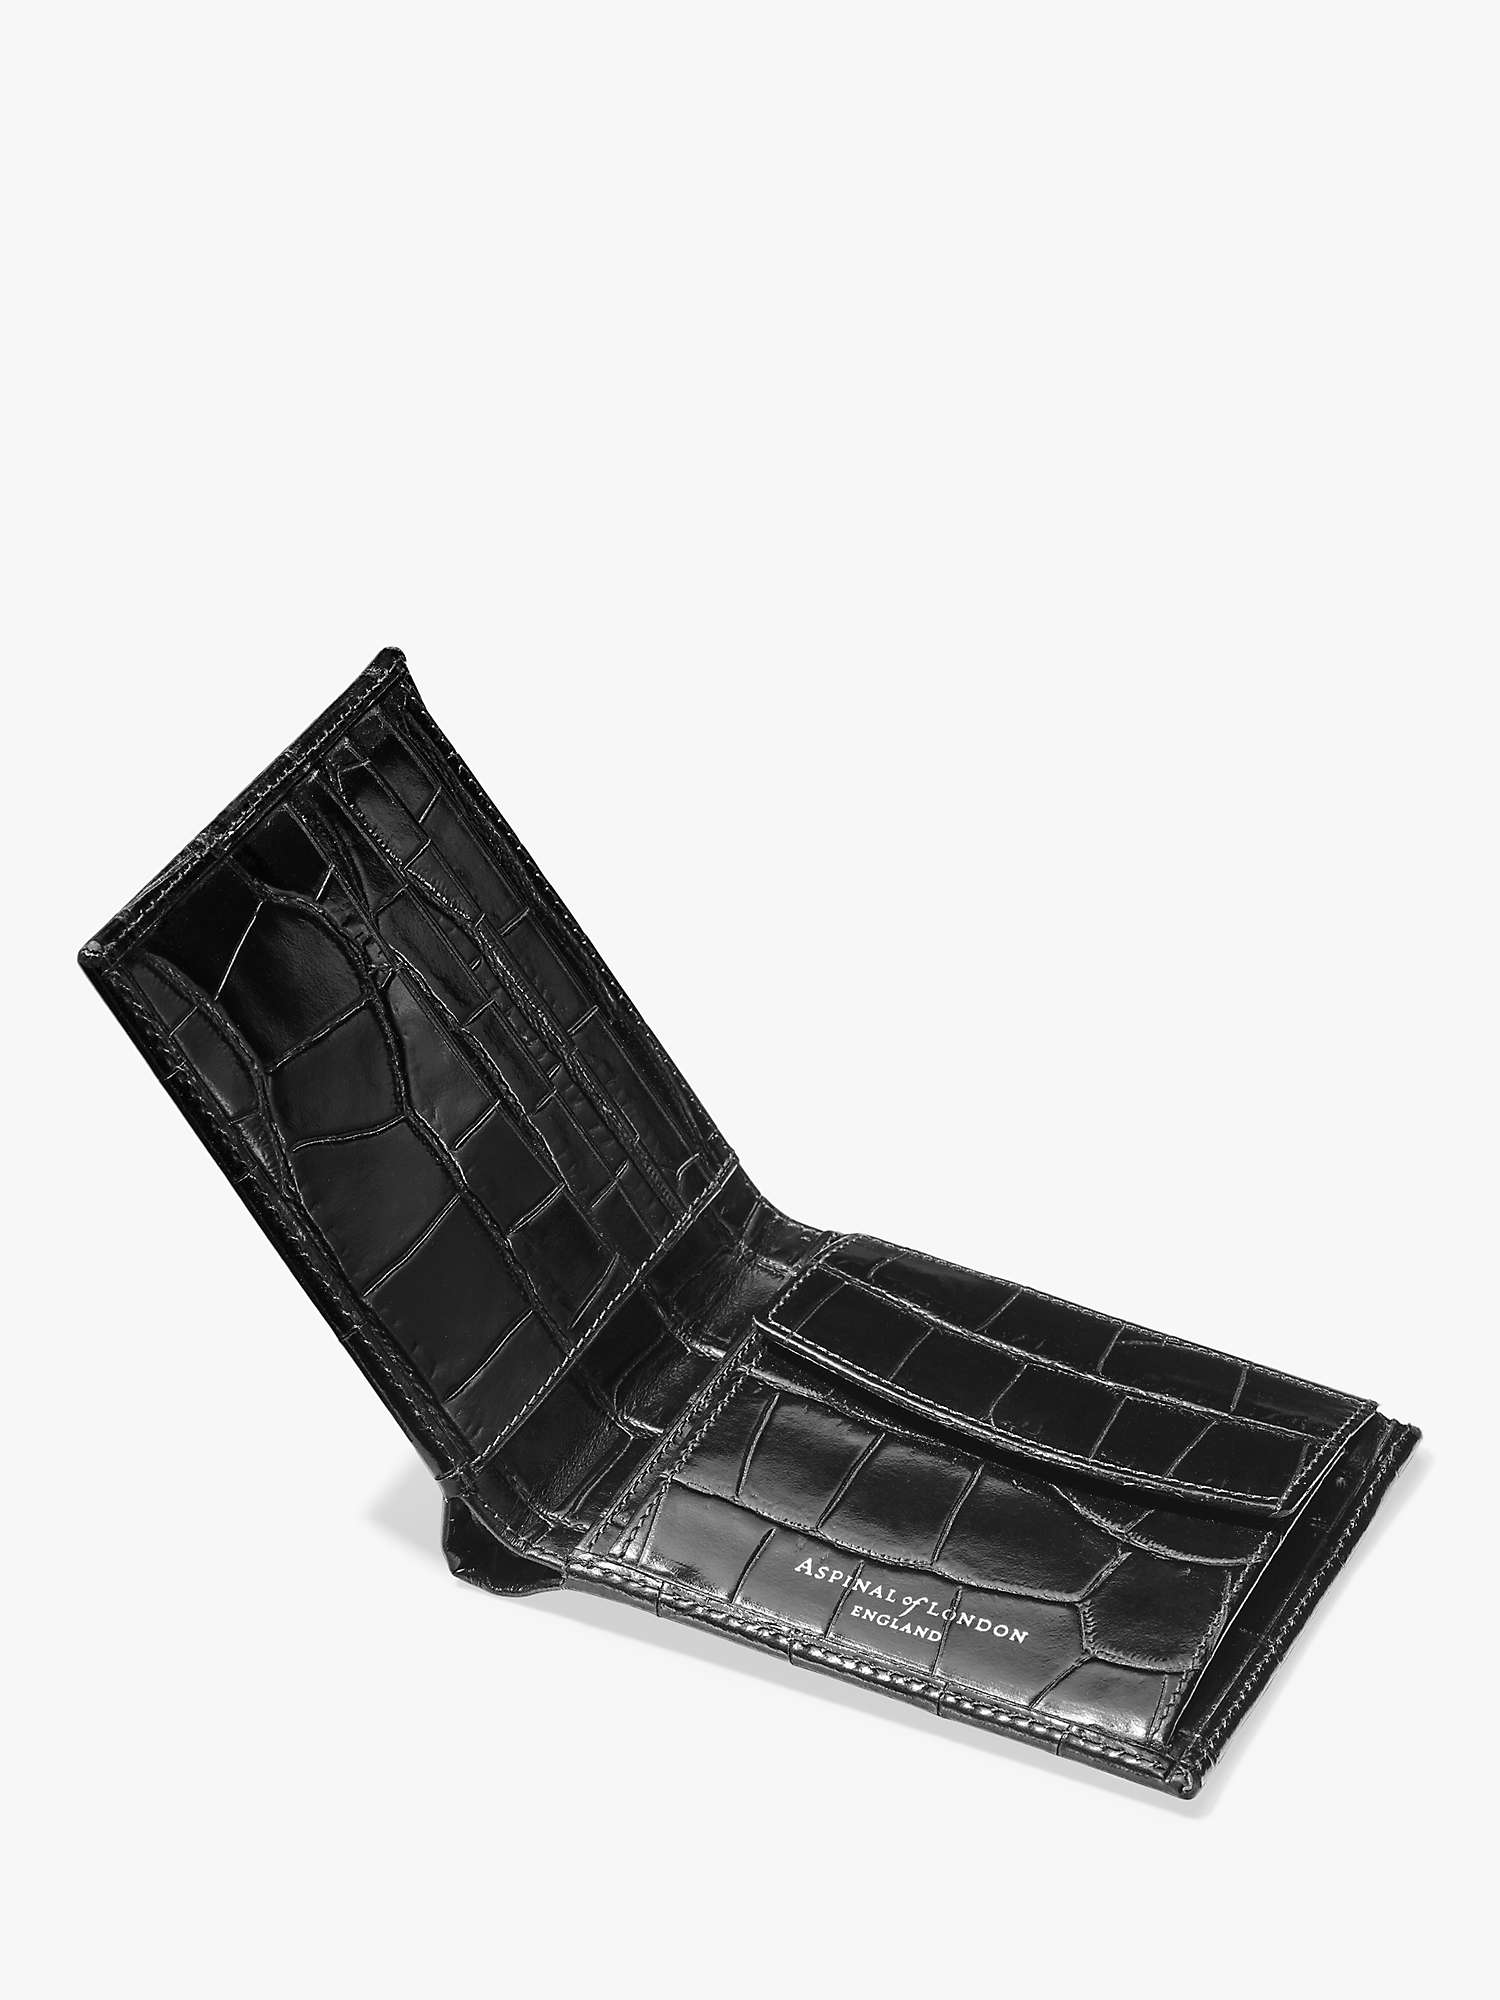 Buy Aspinal of London Billfold Croc Leather Coin Wallet Online at johnlewis.com